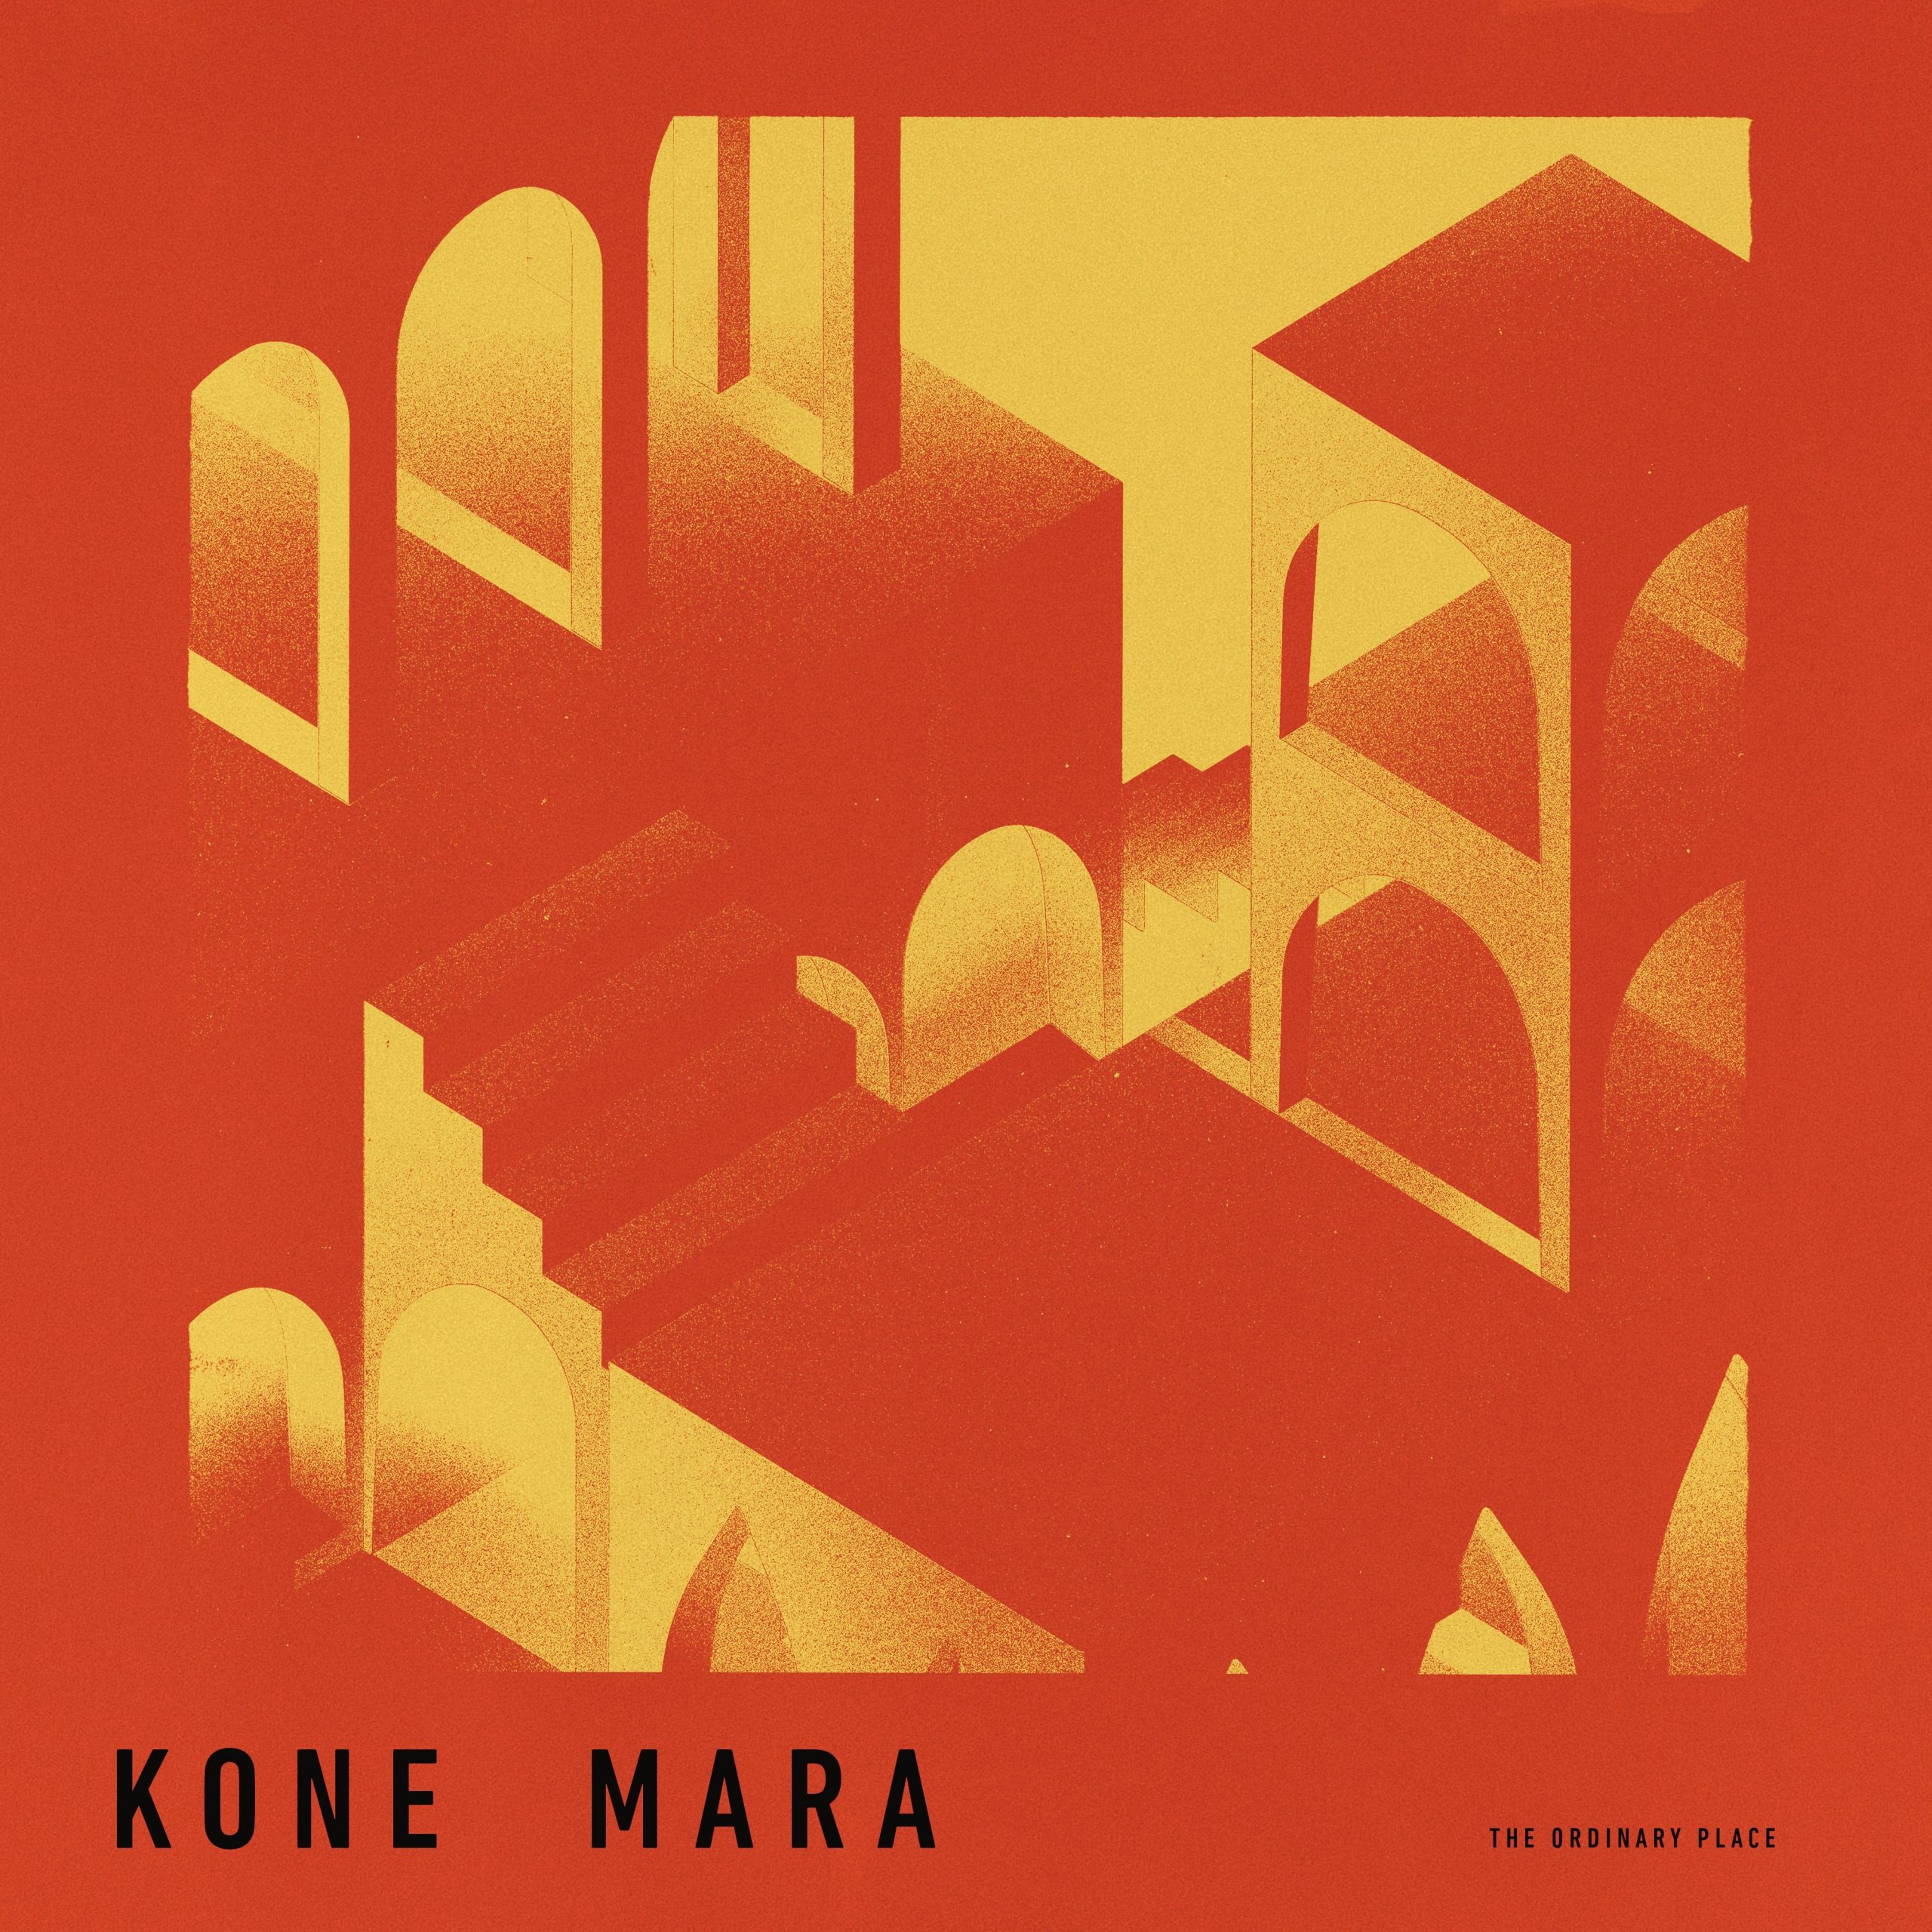 the ordinary place - kone mara - sweden - indie - indie music - indie rock - new music - music blog - wolf in a suit - wolfinasuit - wolf in a suit blog - wolf in a suit music blog